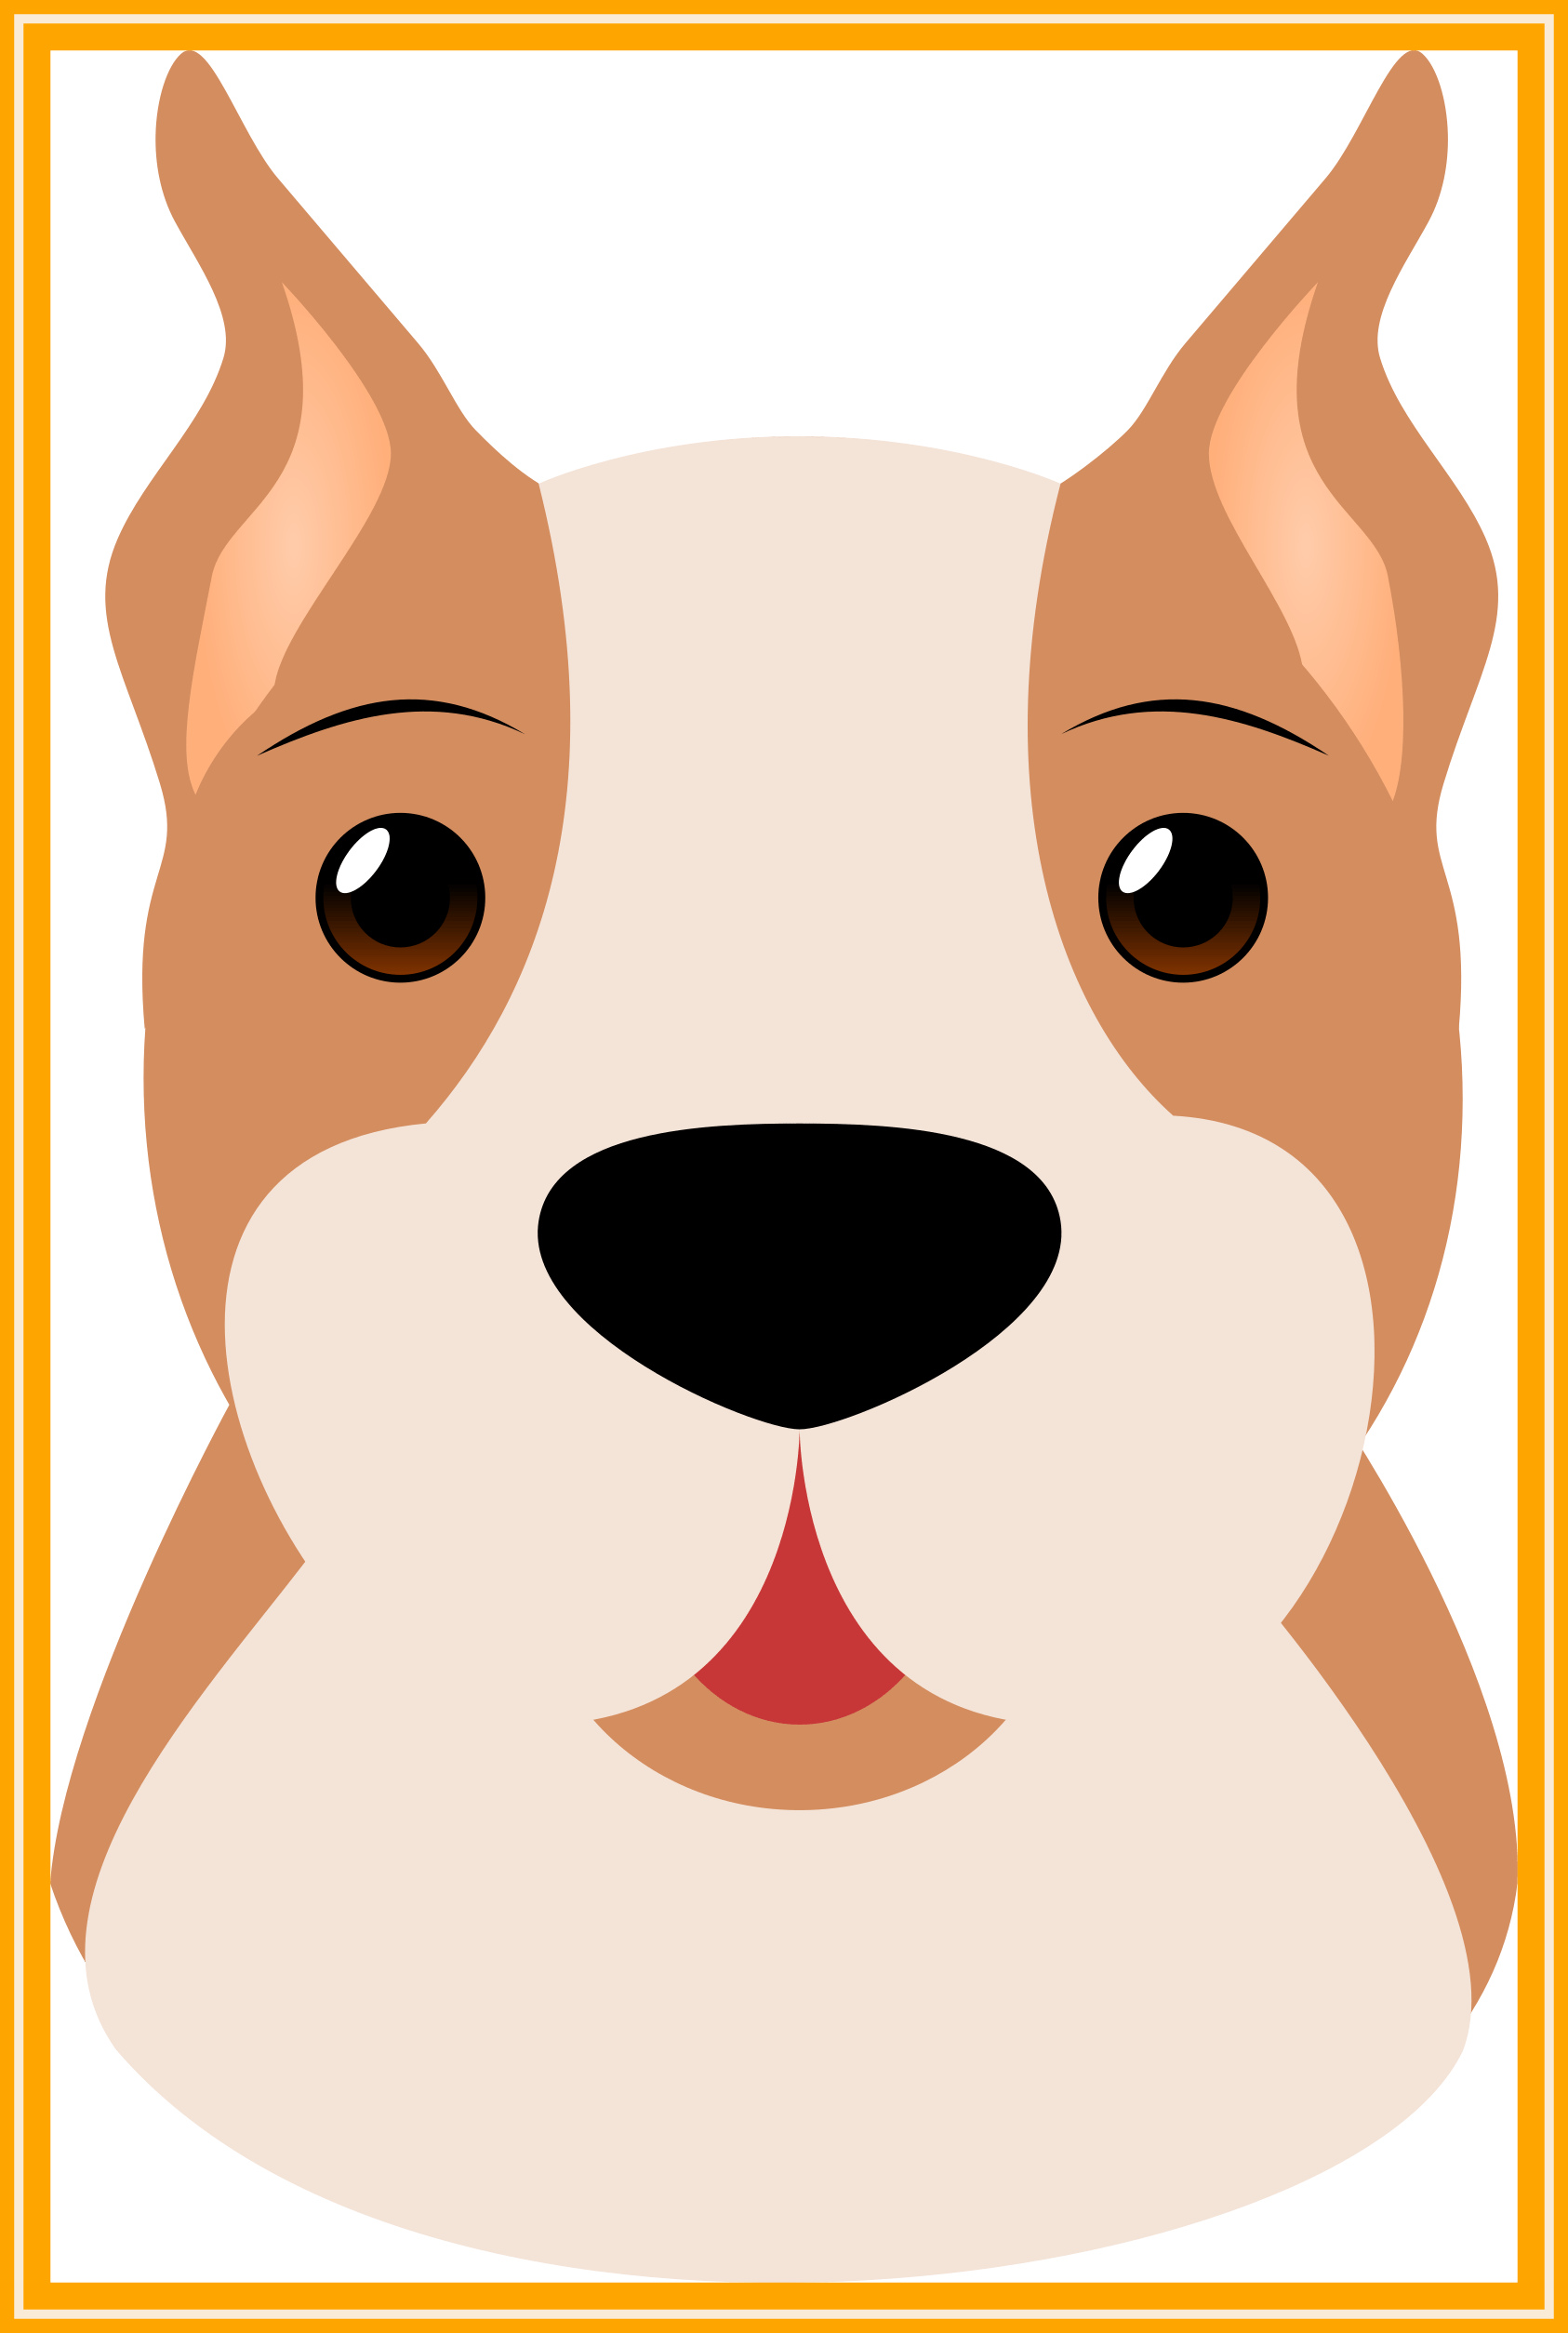 Appealing cute boxer dog. Husky clipart puppie